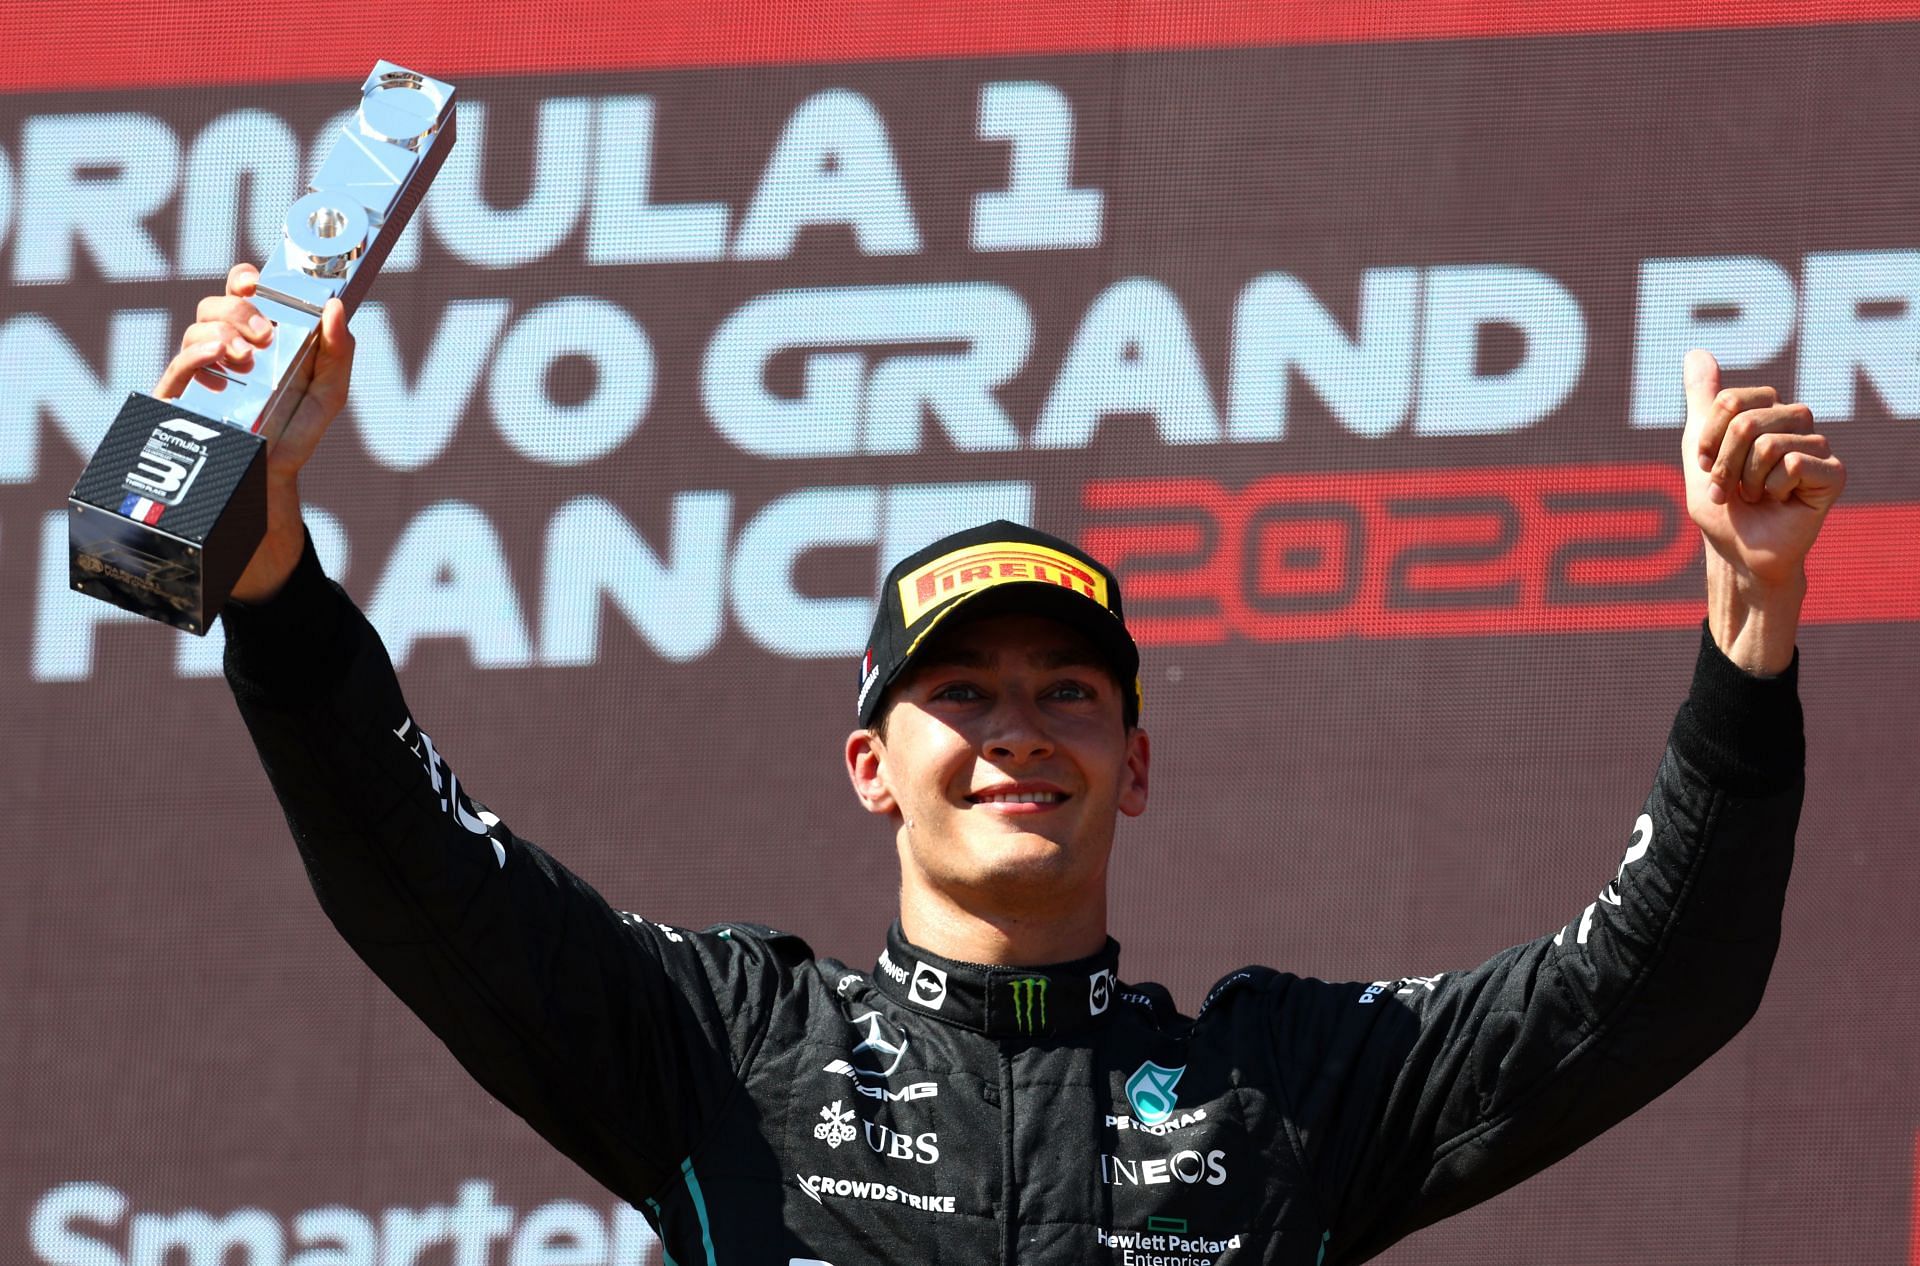 Third-placed George Russell celebrates on the podium during the F1 Grand Prix of France at Circuit Paul Ricard on July 24, 2022, in Le Castellet, France (Photo by Clive Rose/Getty Images)